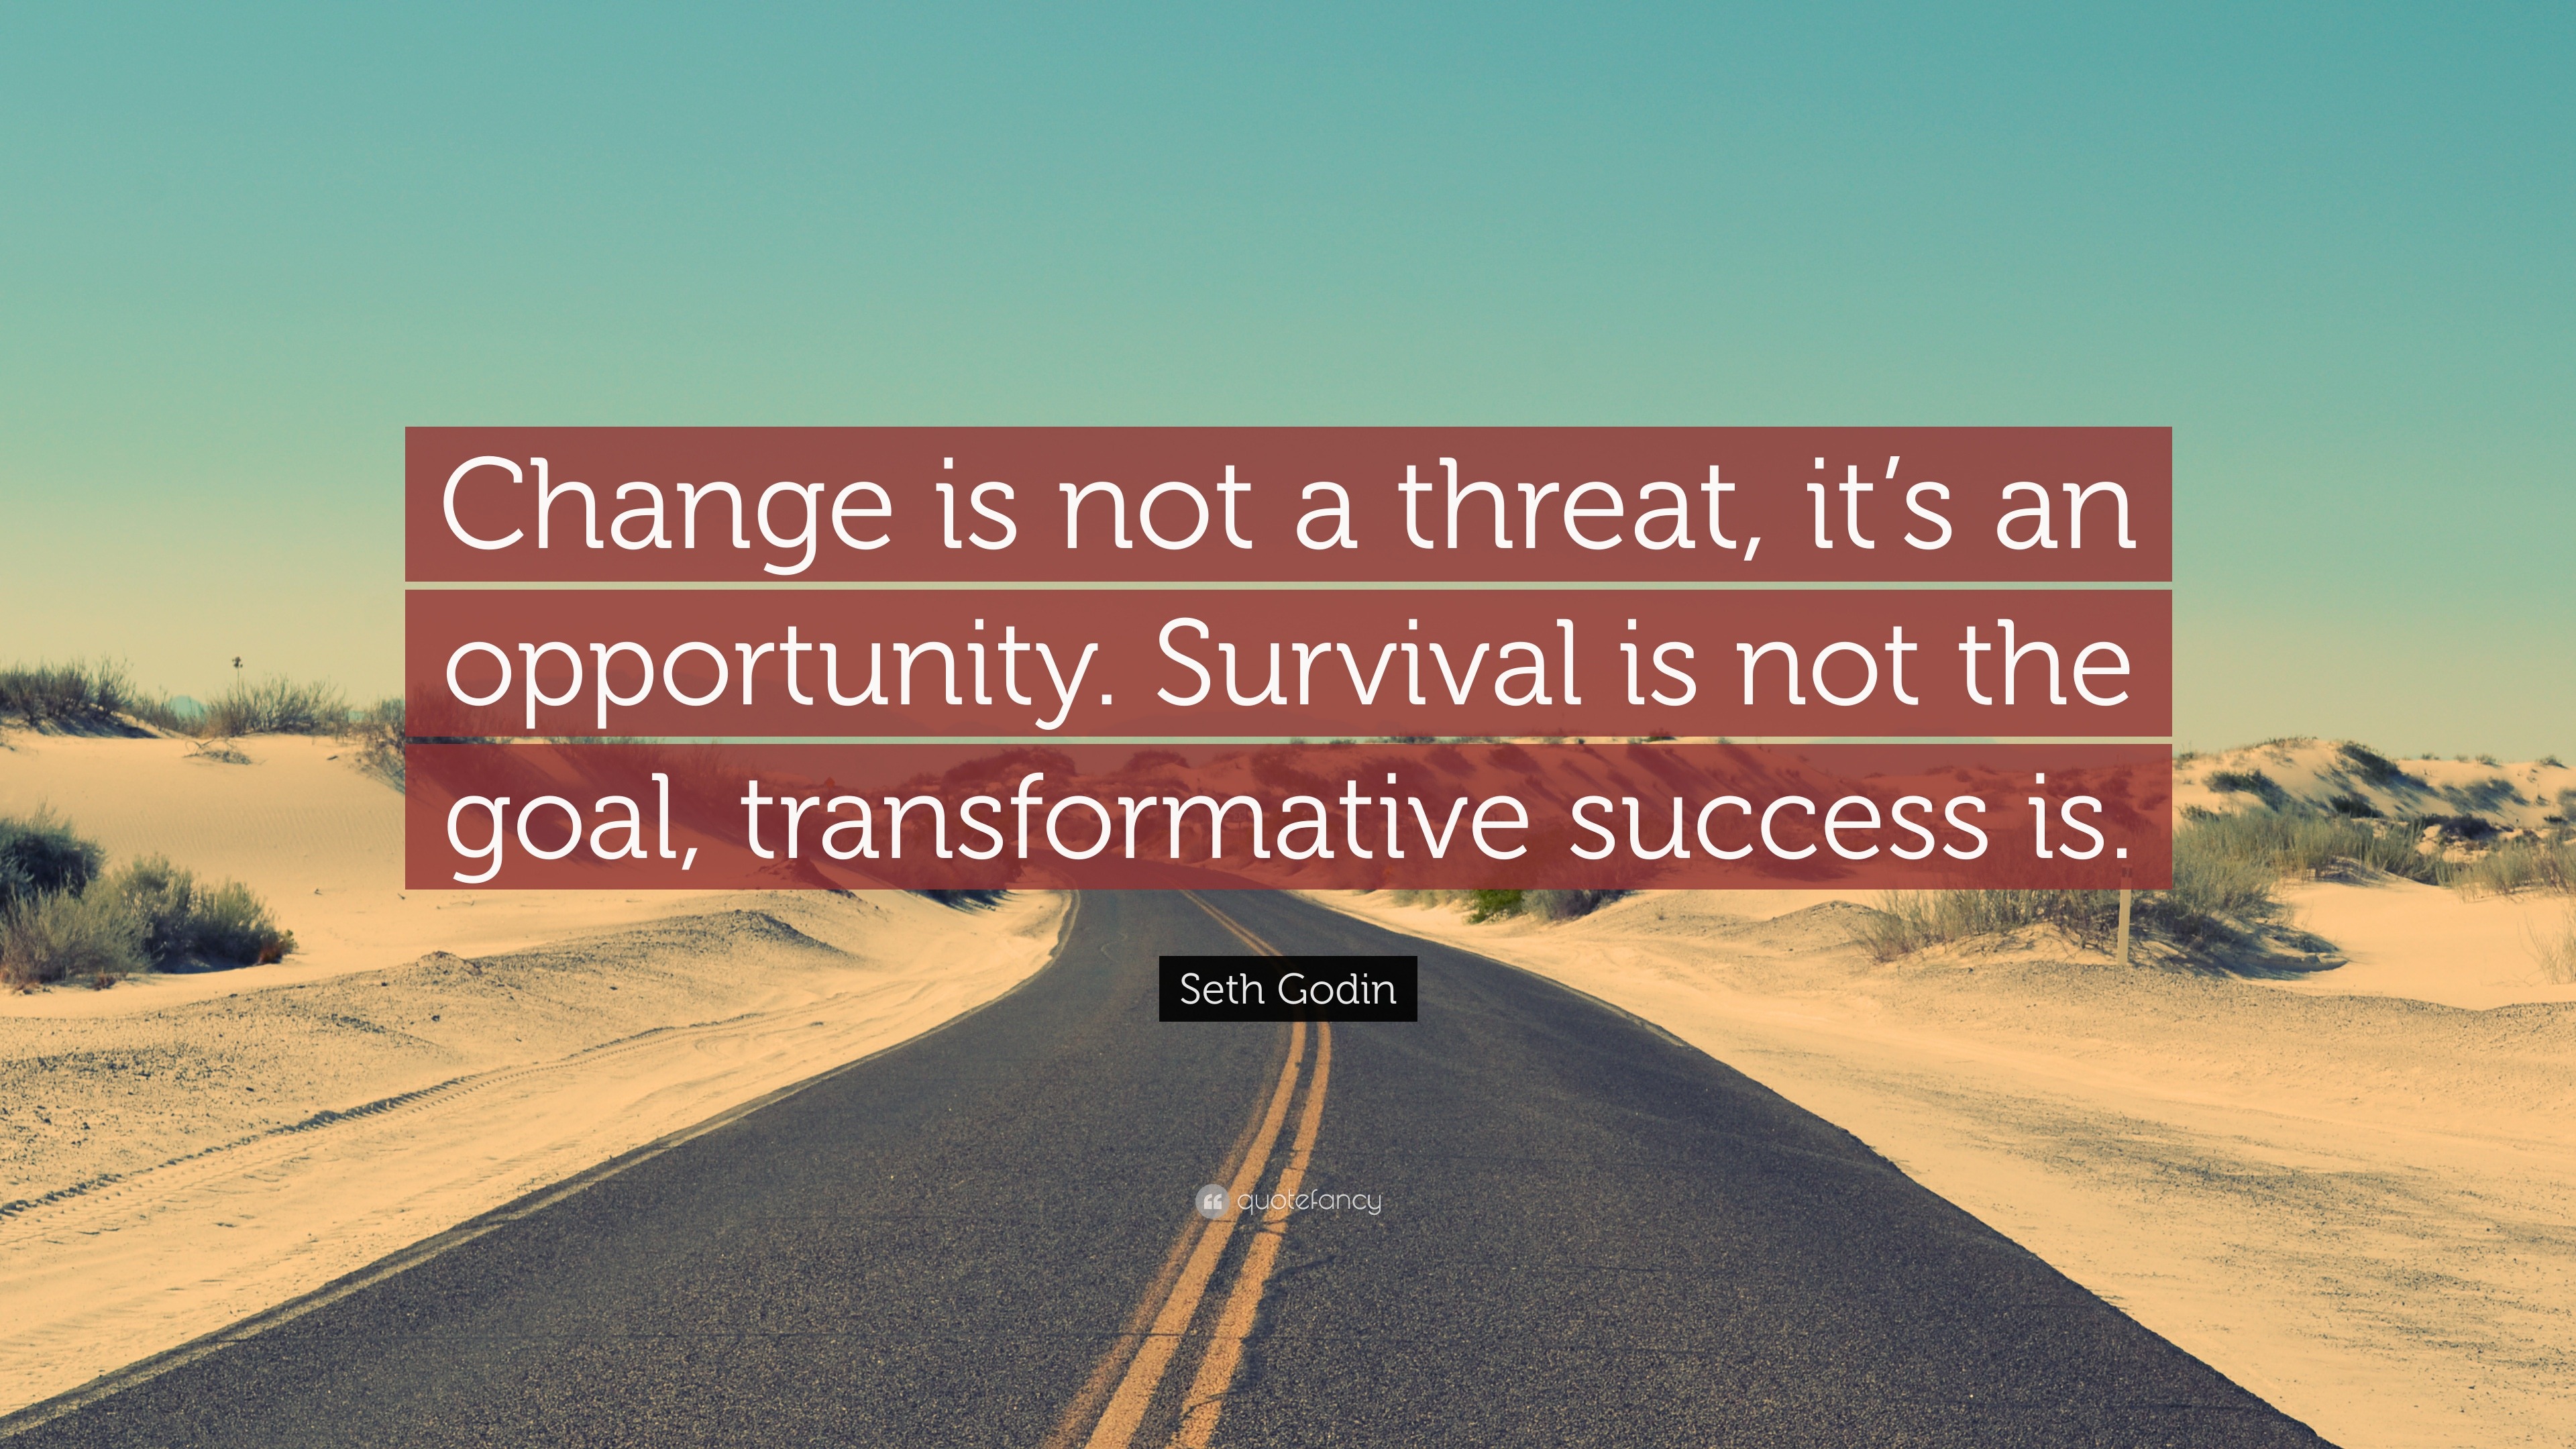 Seth Godin Quote “Change is not a threat, it’s an